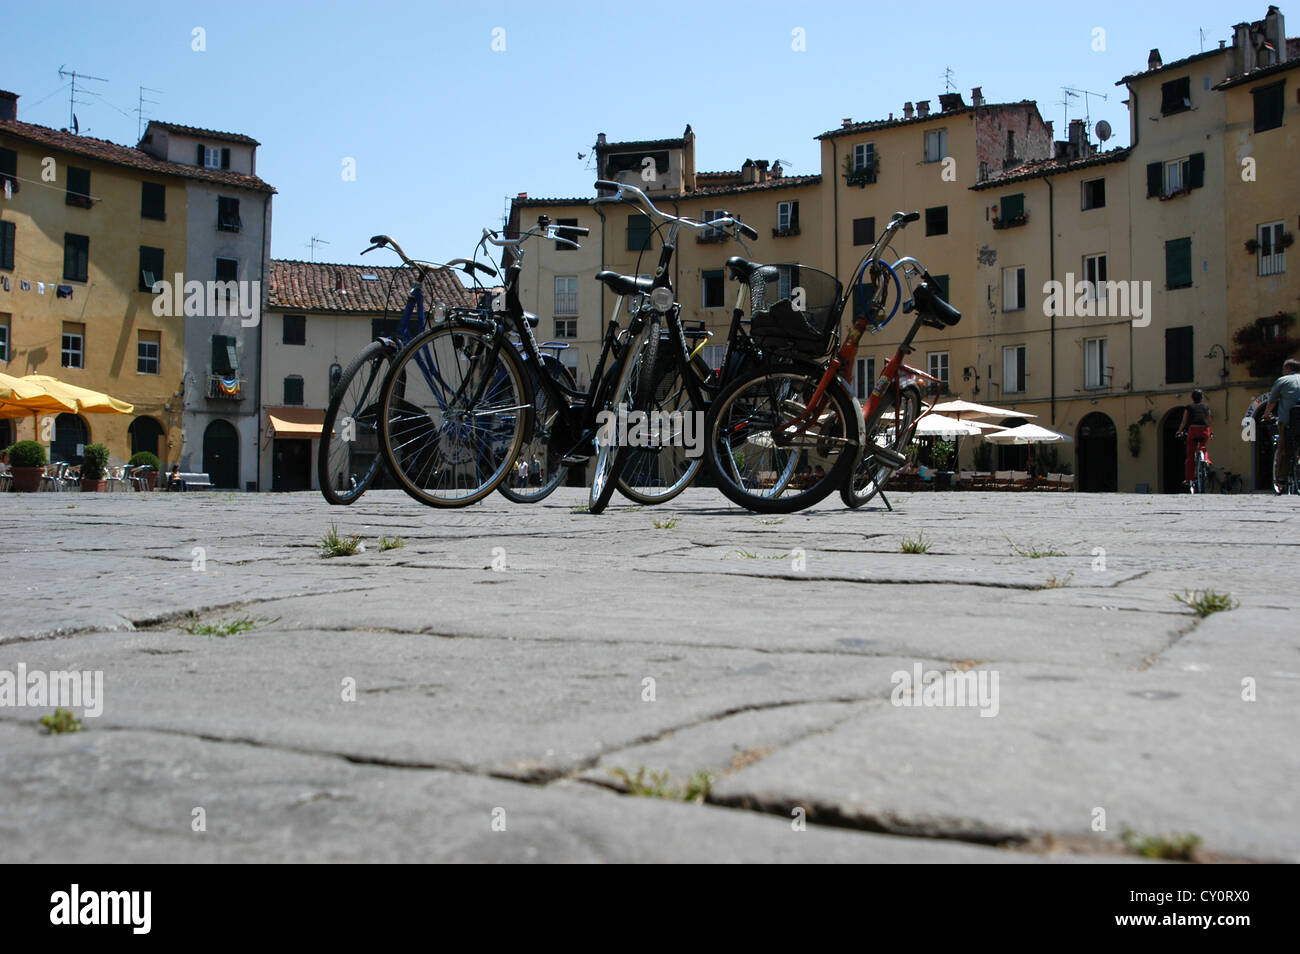 Tourist bicycles for hire in the piazza, in the picturesque village of Lucca, Tuscany, Italy. Stock Photo